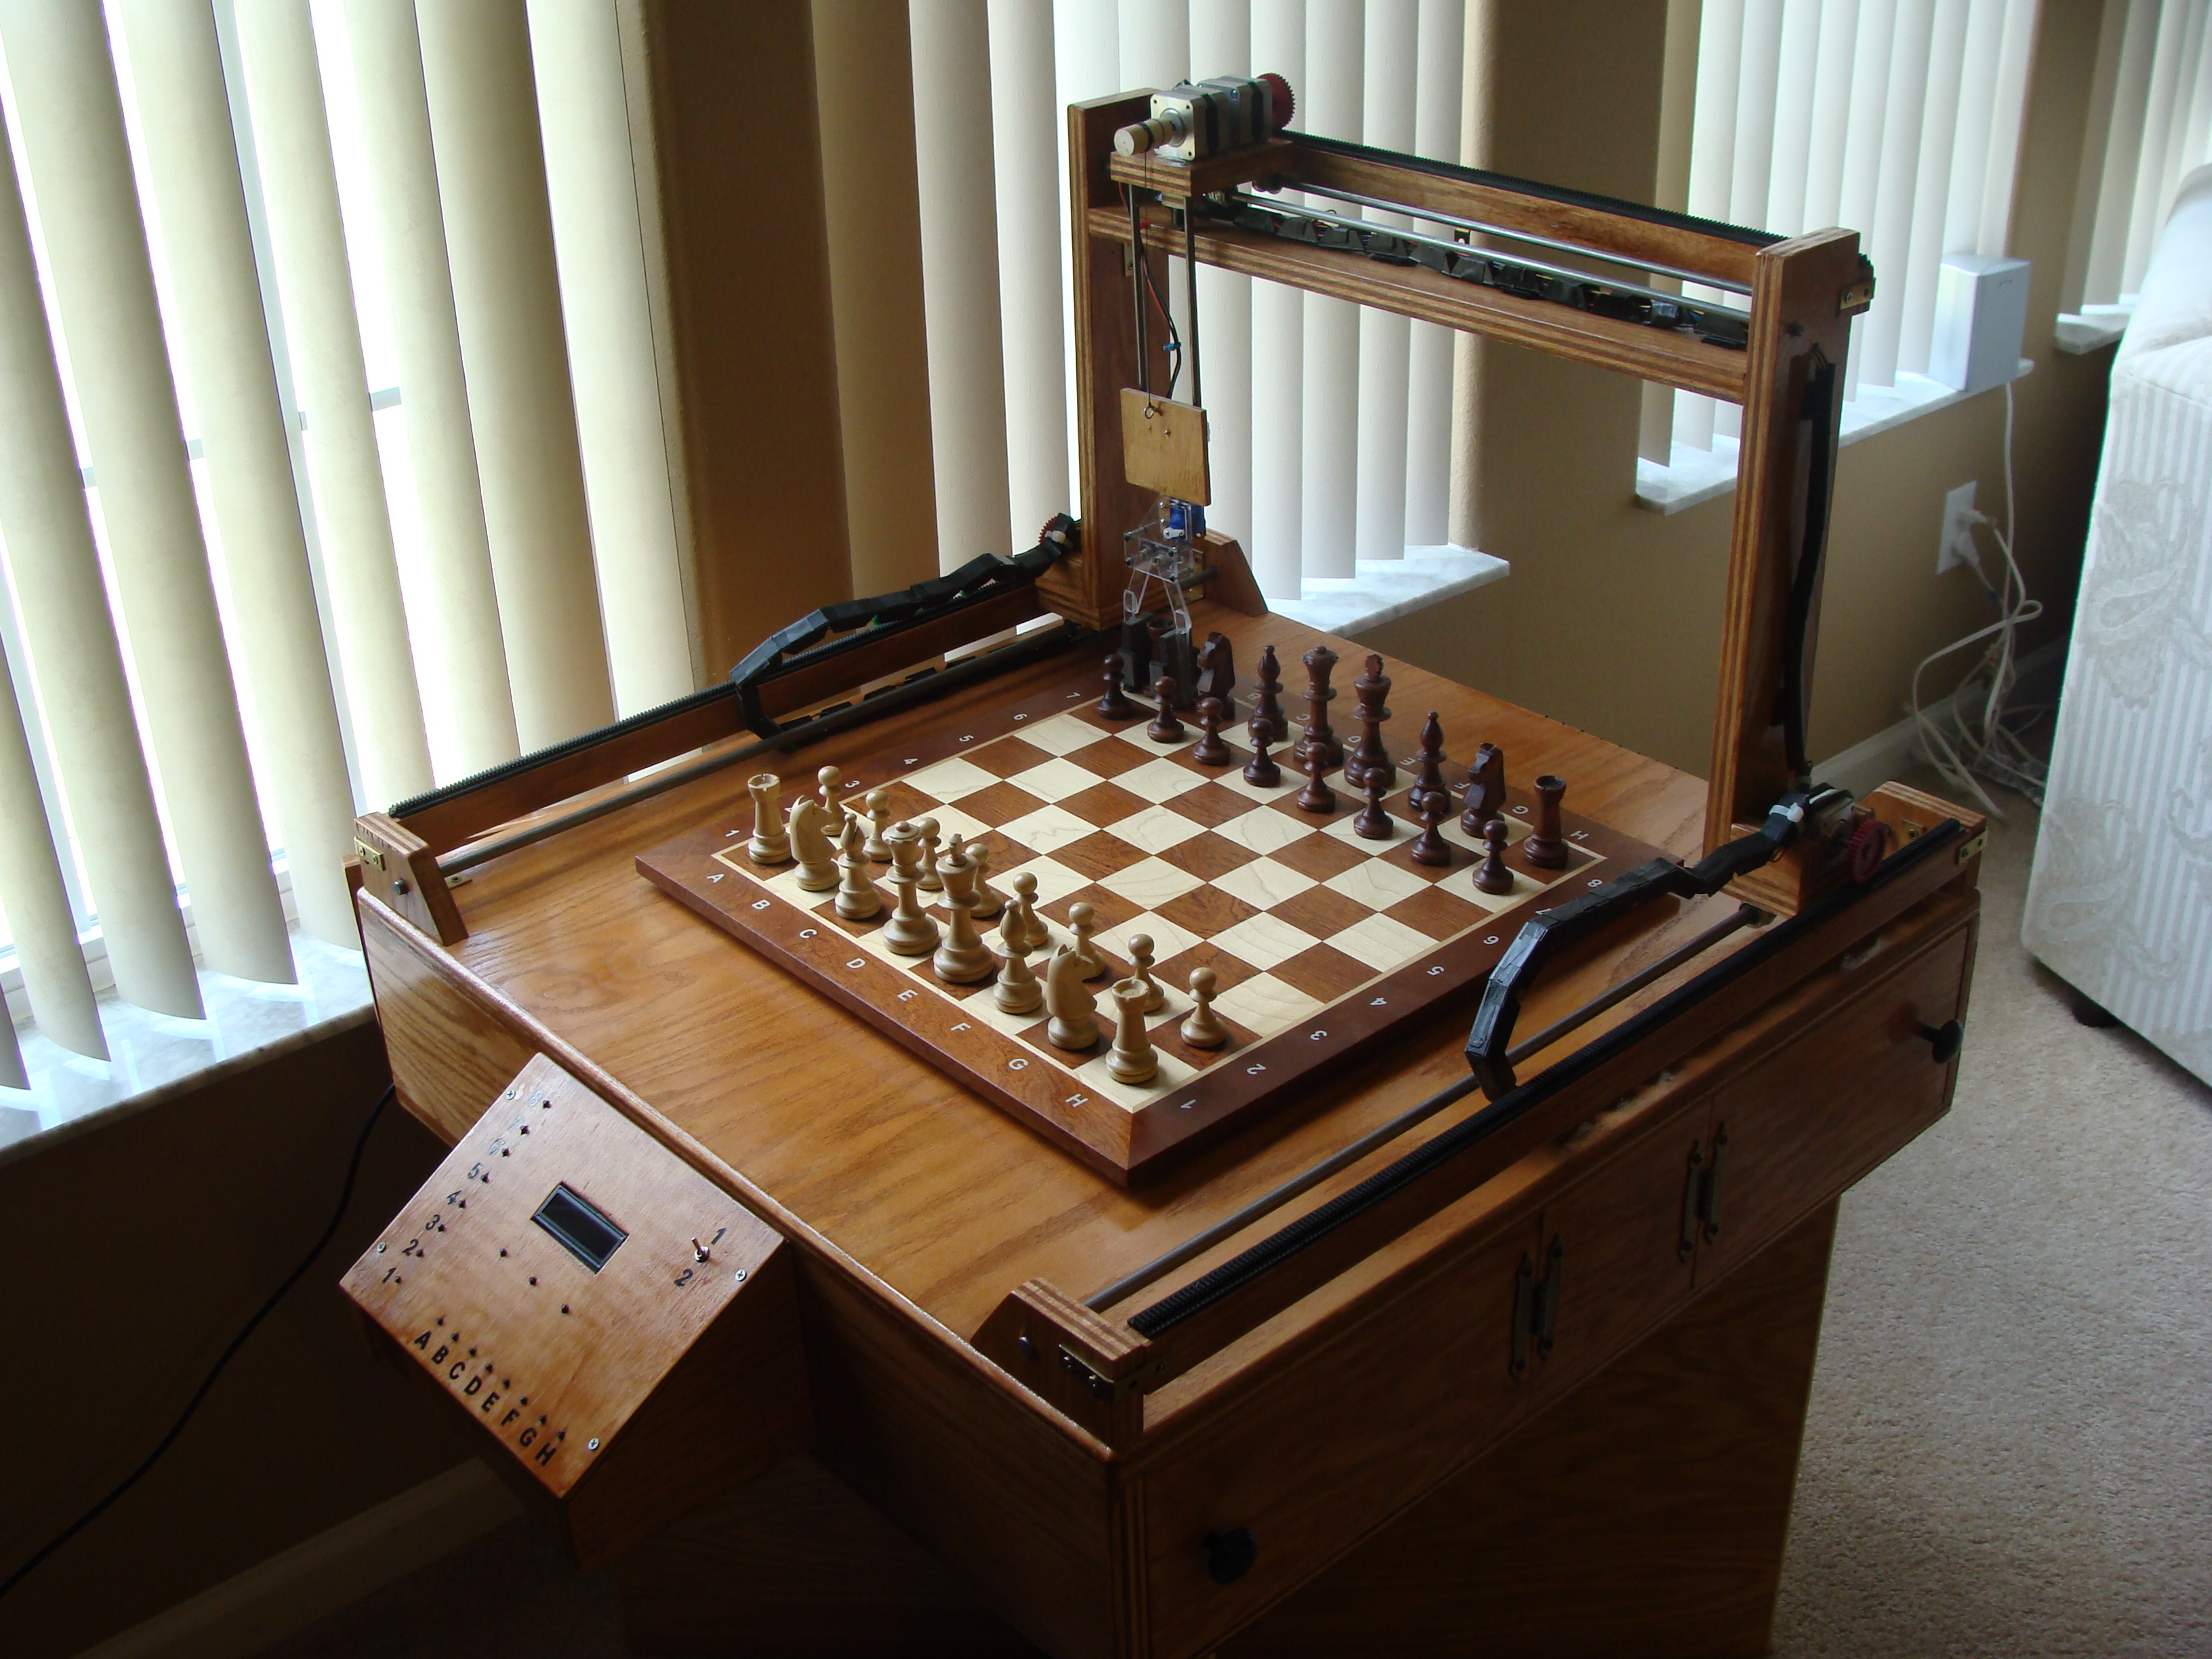 Make your own chess computer using an Arduino 